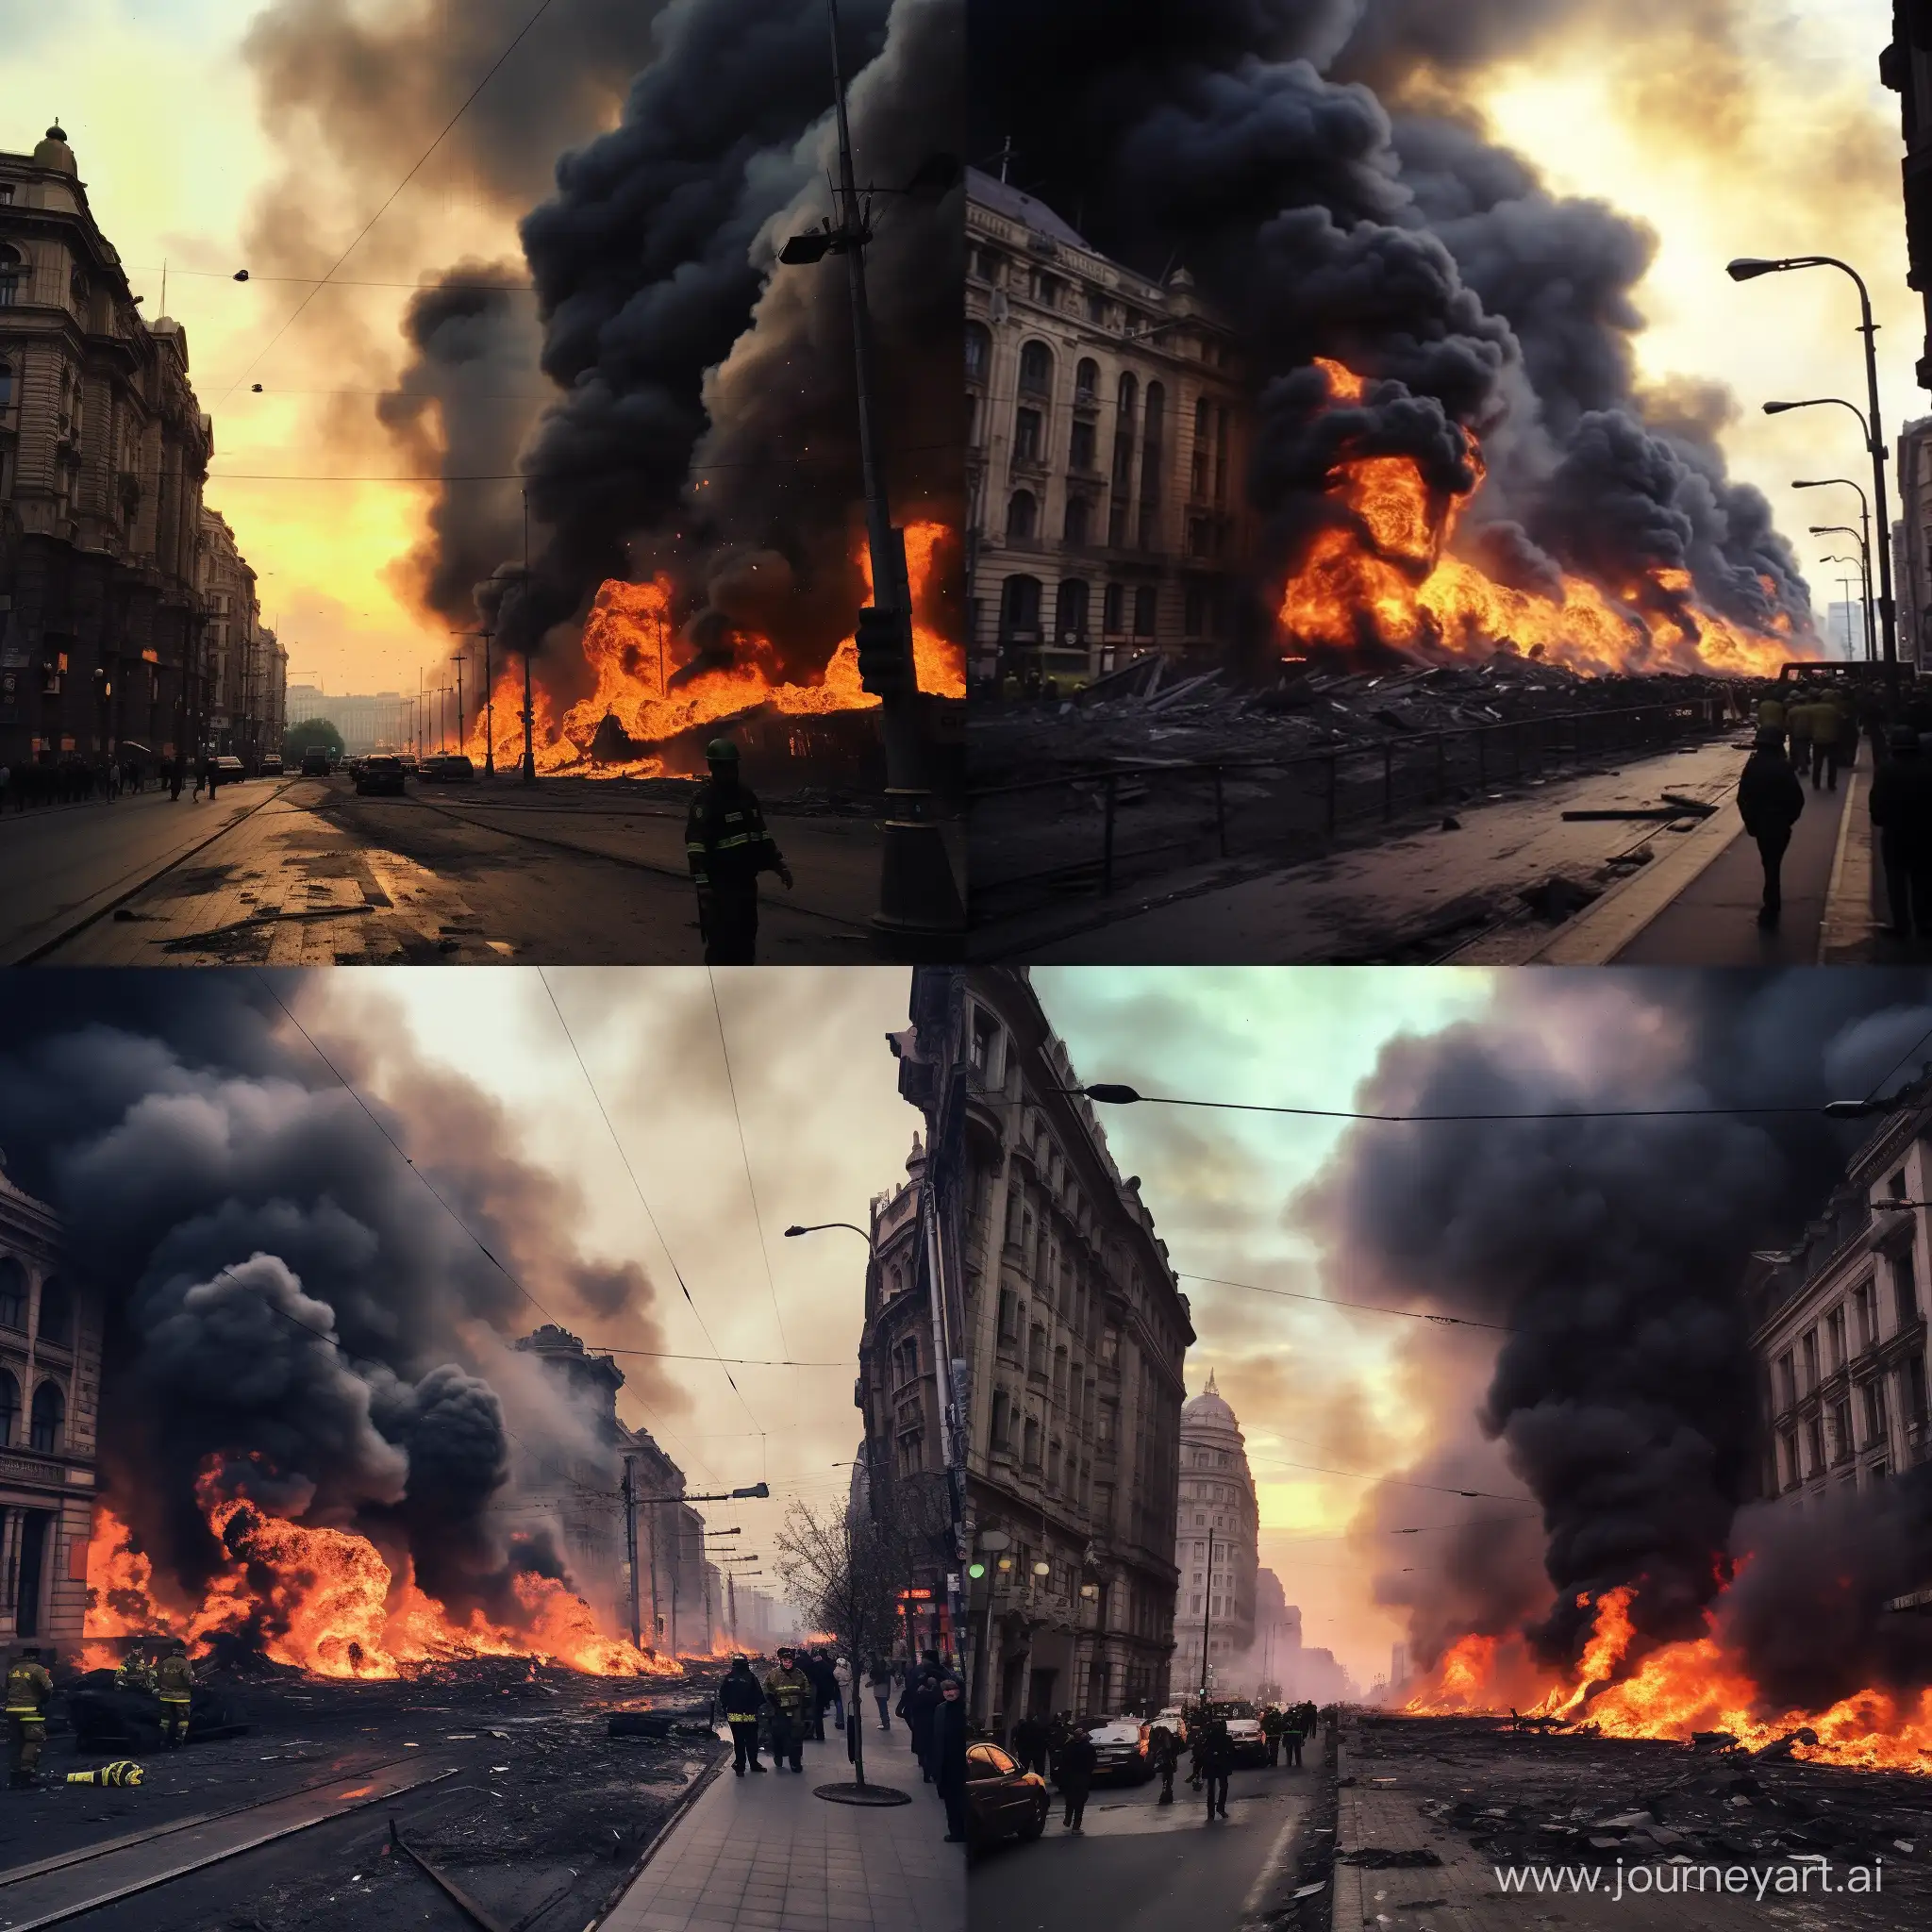 Khreshchatyk, the central street of Kyiv is burning after massive bombings, the sky is covered with black smoke, the remains of soldiers lie on the street